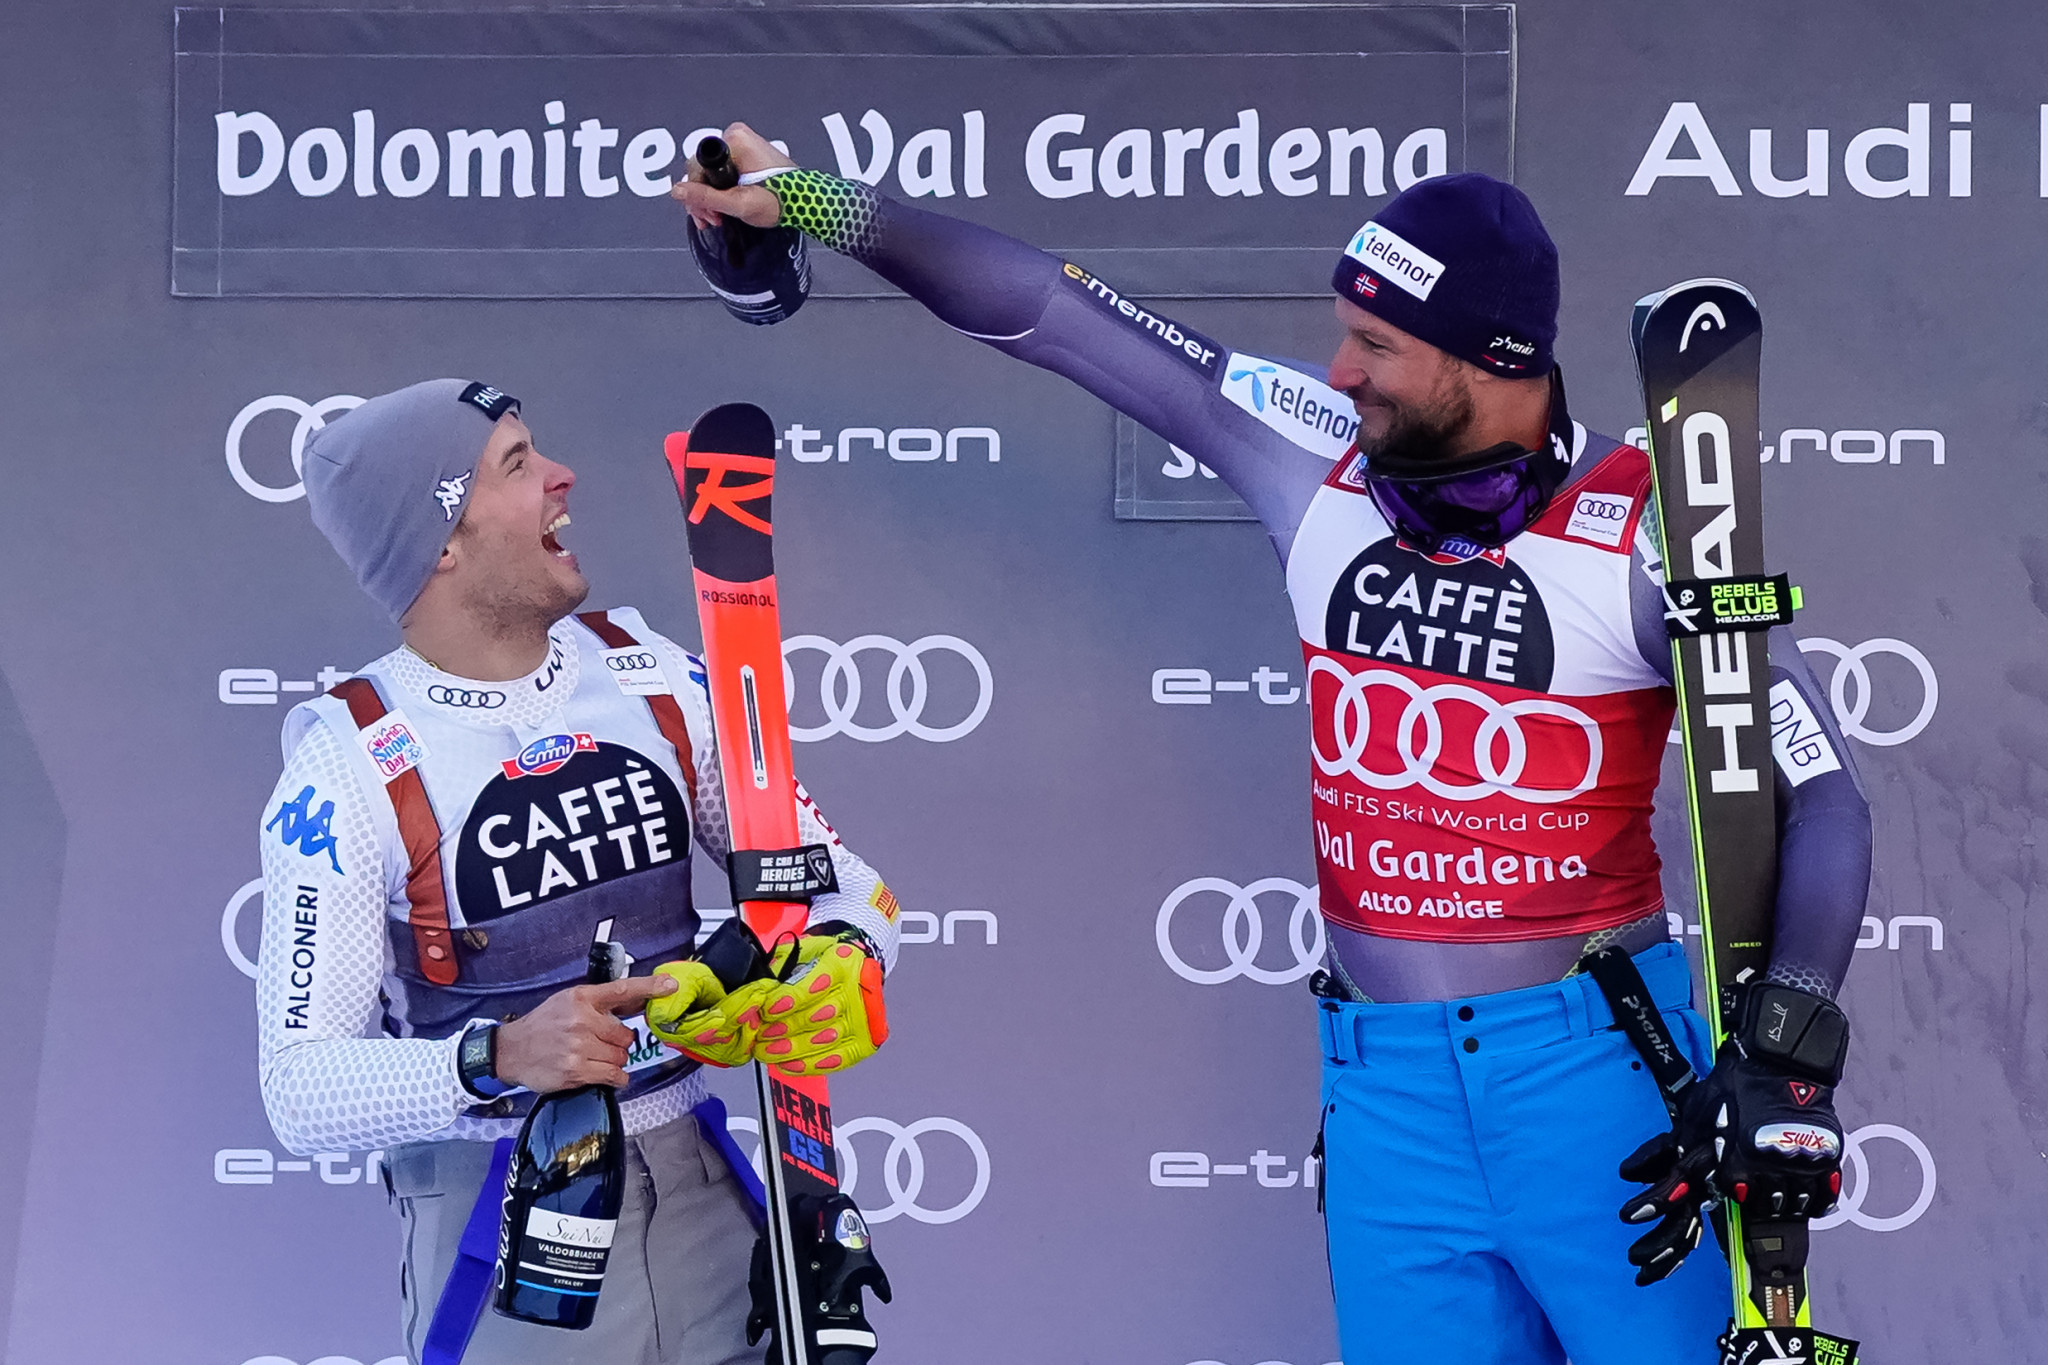 Norway's Aksel Lund Svindal earned his 36th FIS World Cup win in Val Gardena today ©Getty Images